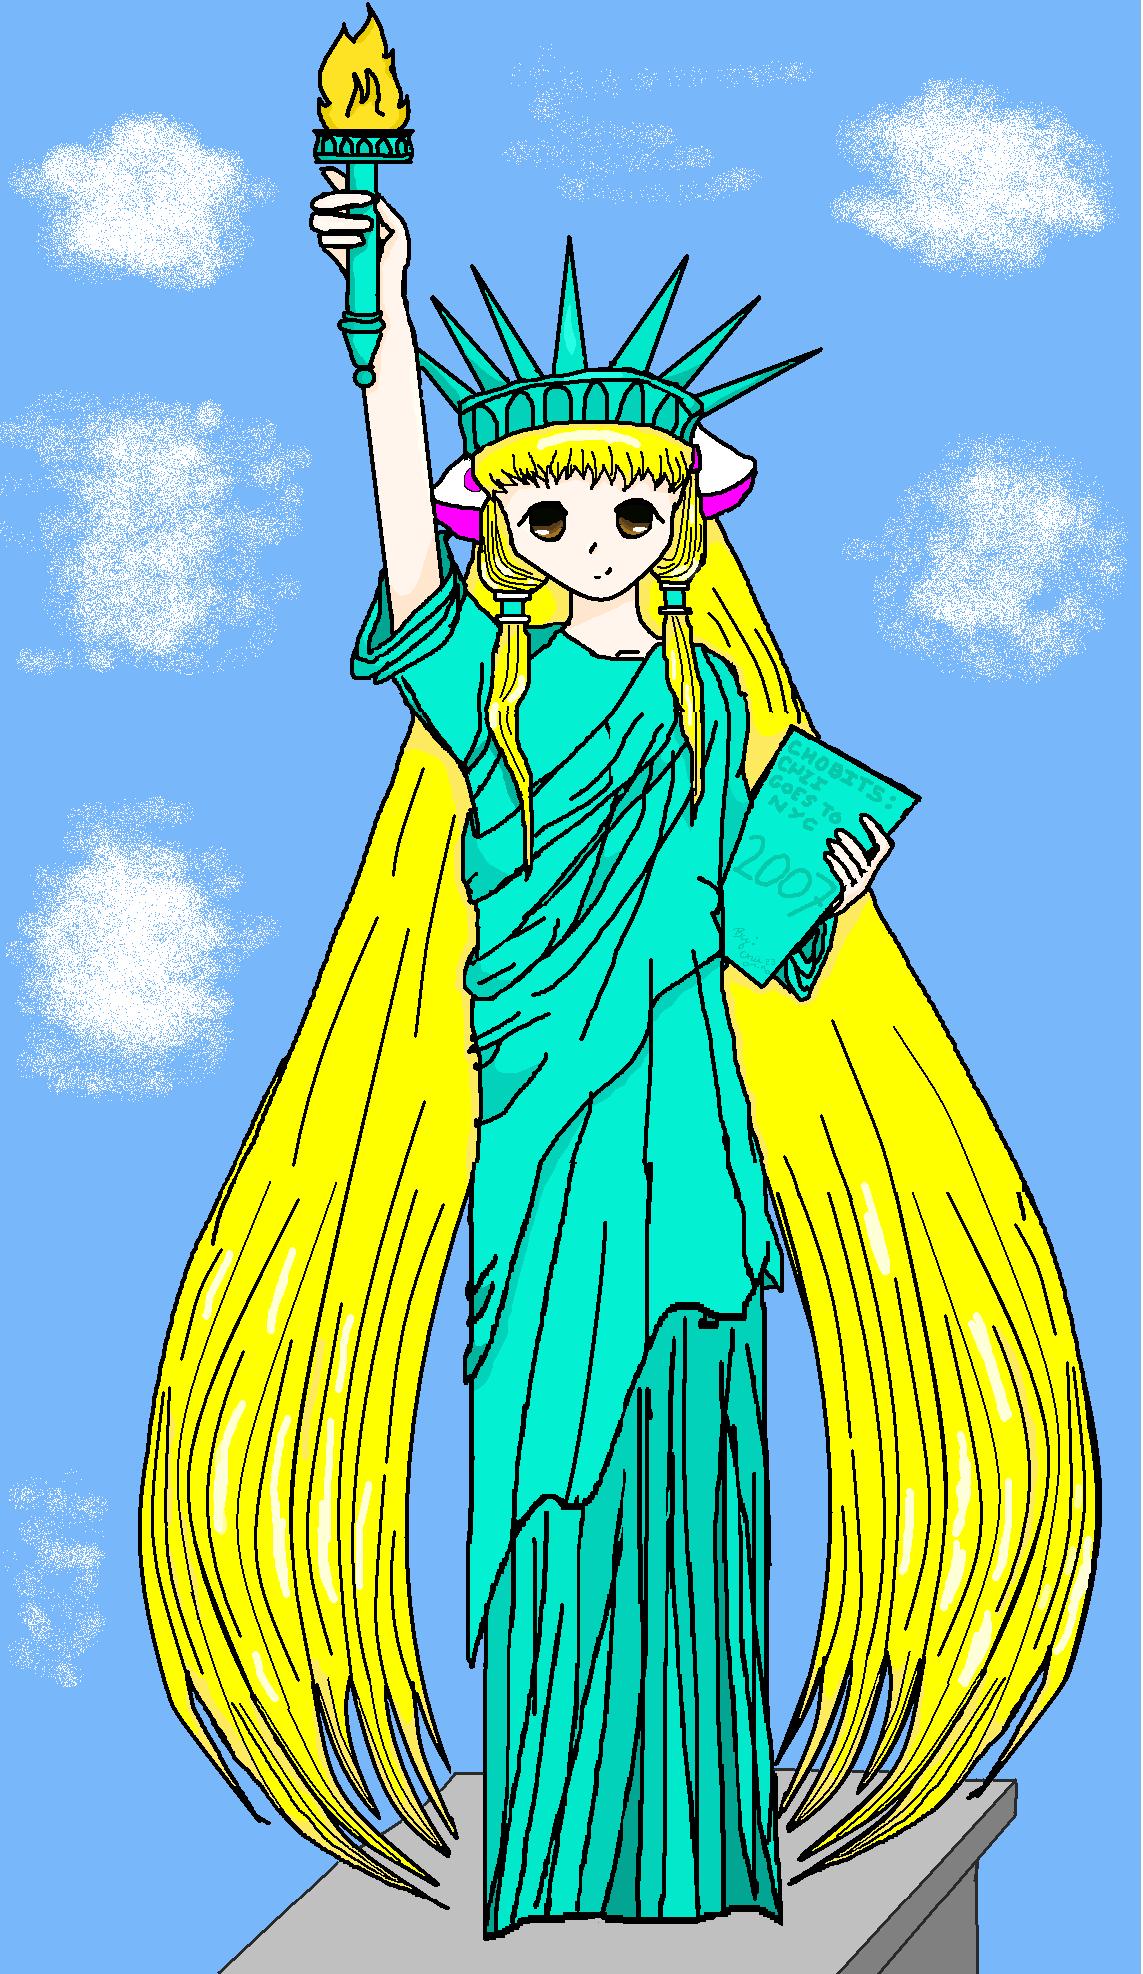 Chii as a Statue of Liberty by Gabriella23